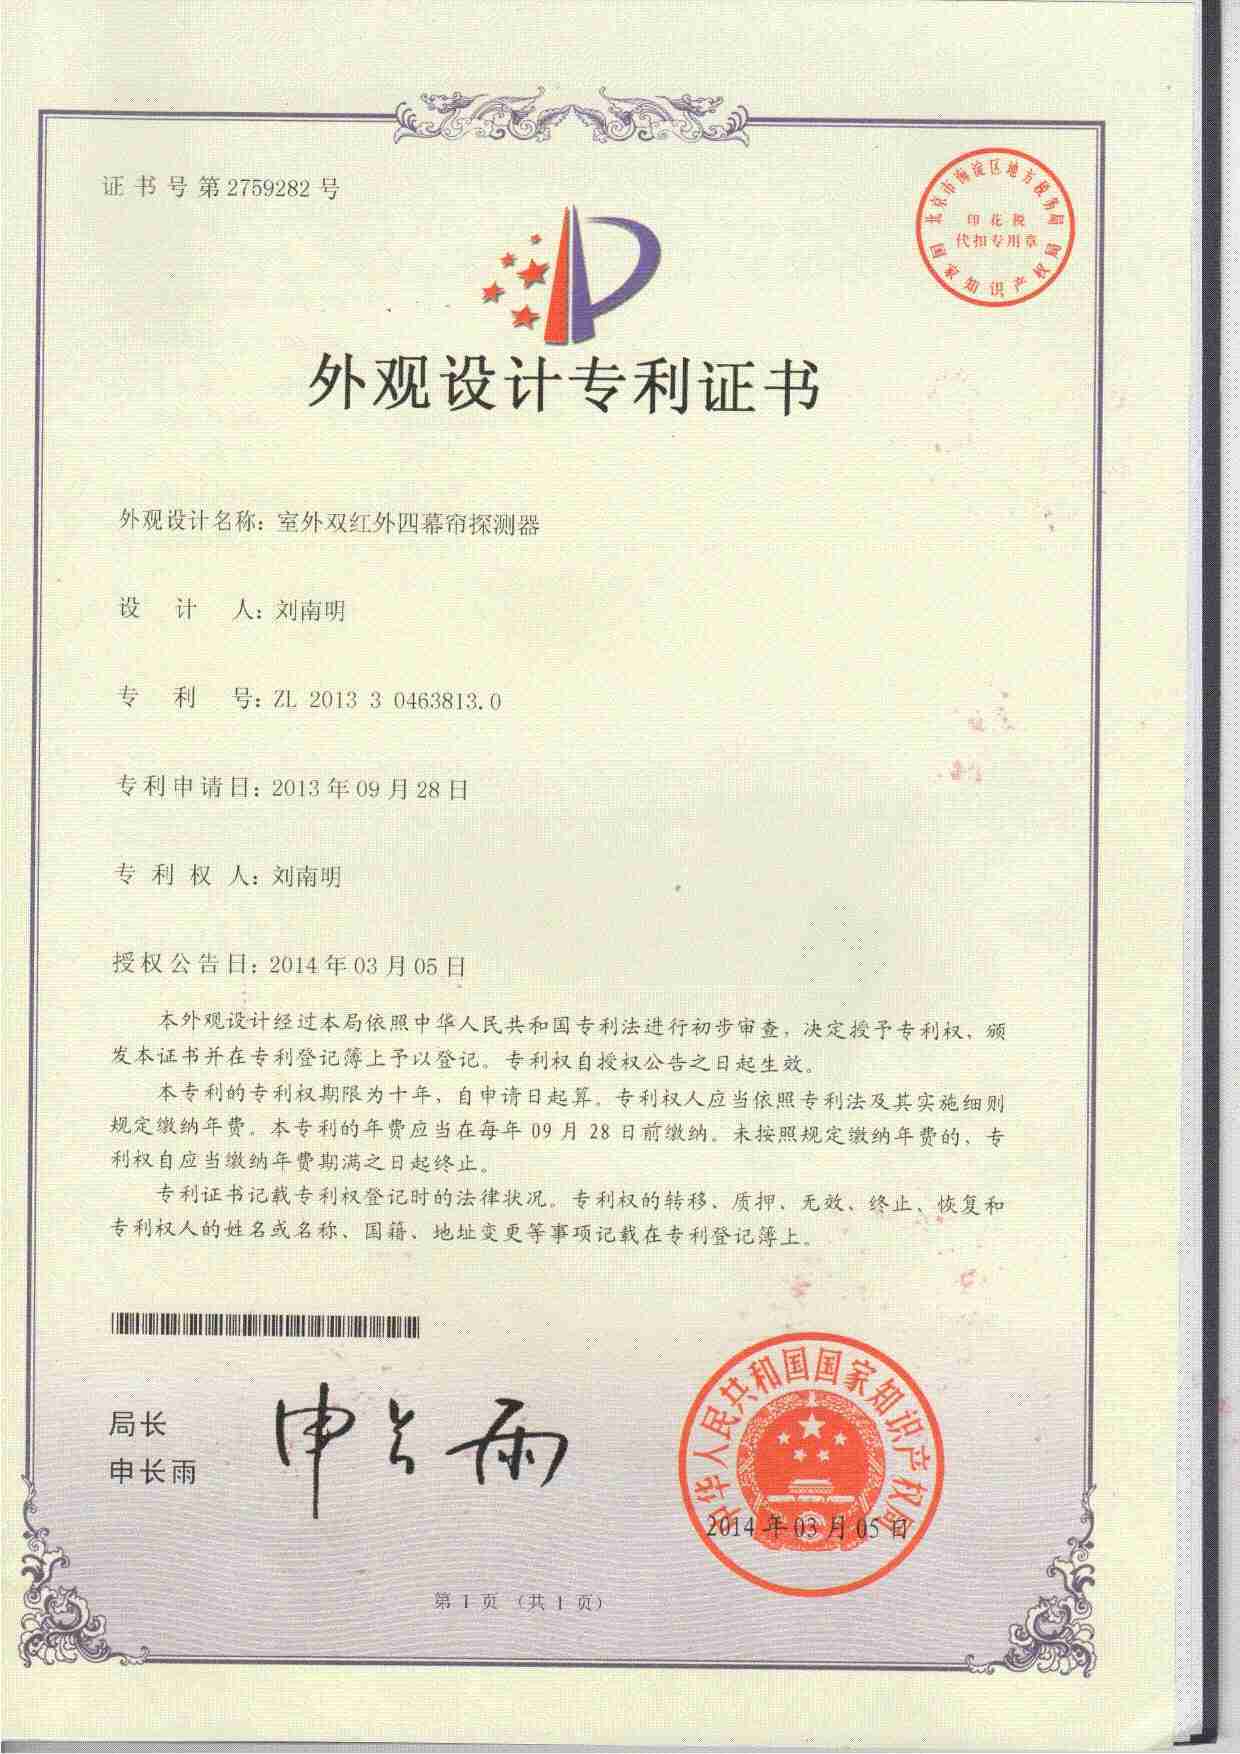 The WG-027 patent certificate